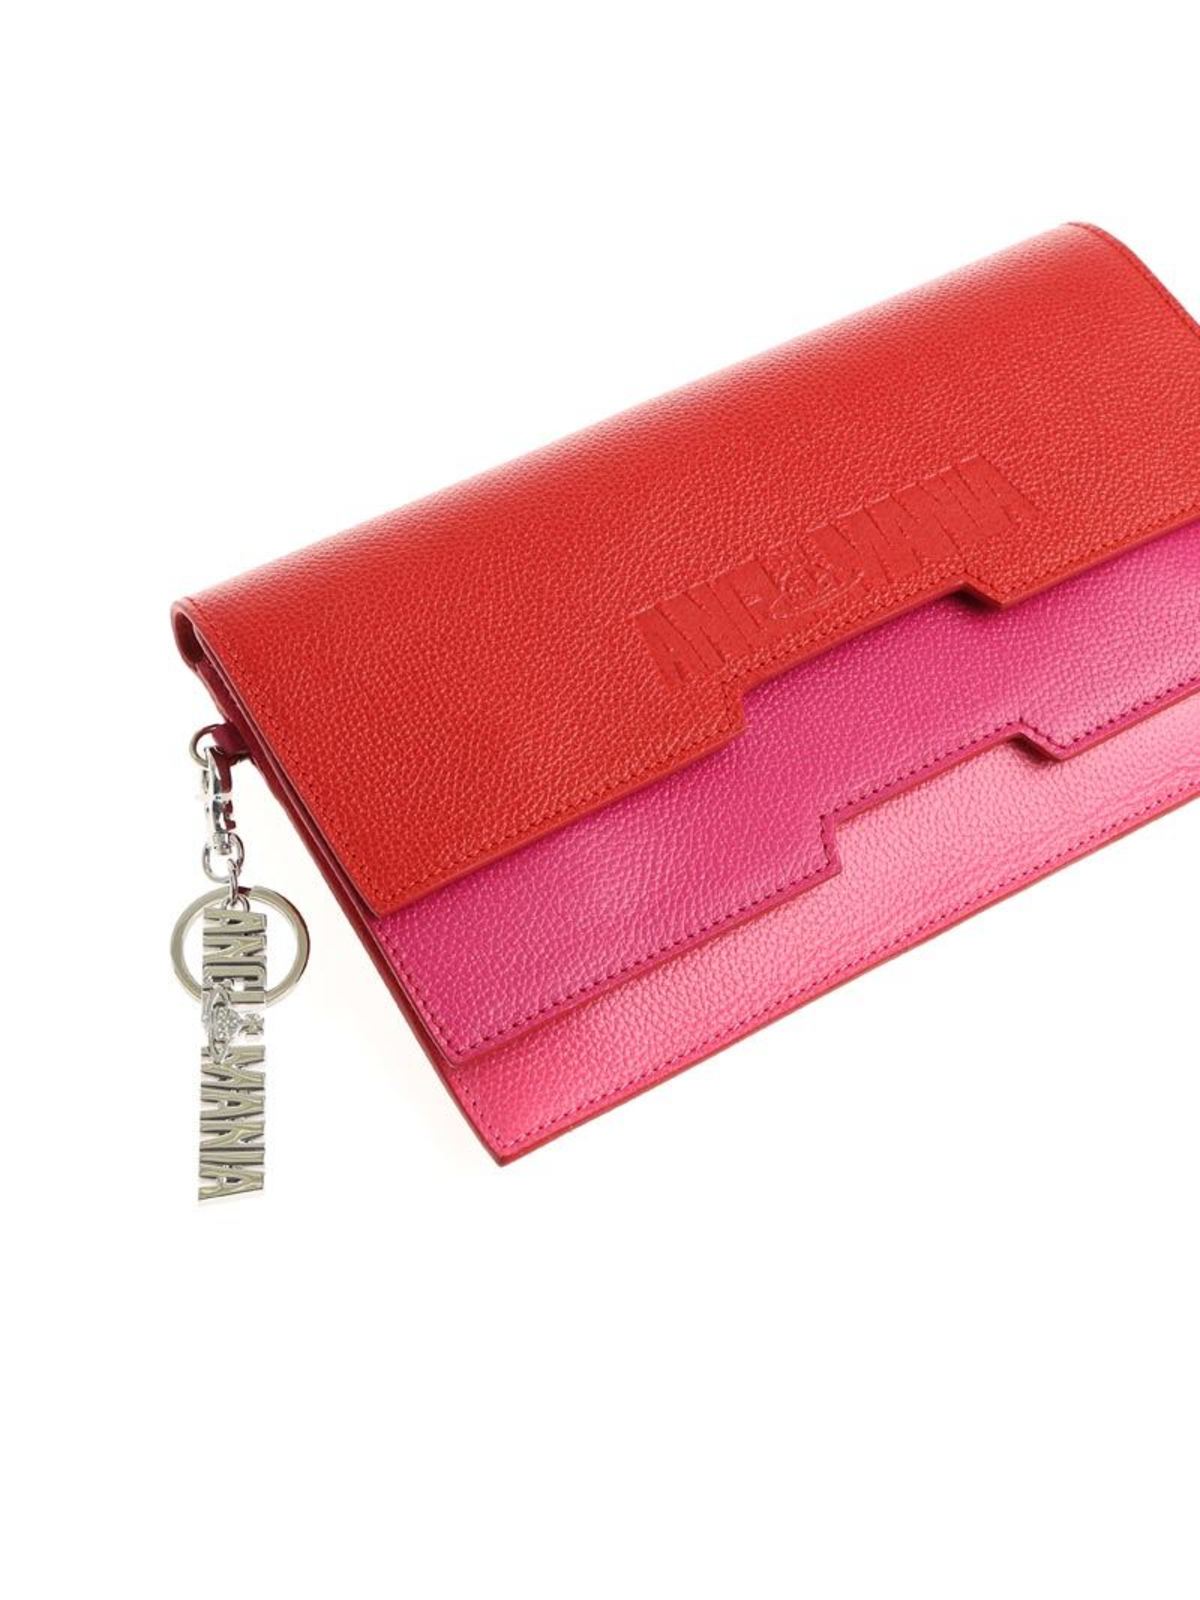 Shop Vivienne Westwood Anglomania Grainy Leather Clutch In Rosado